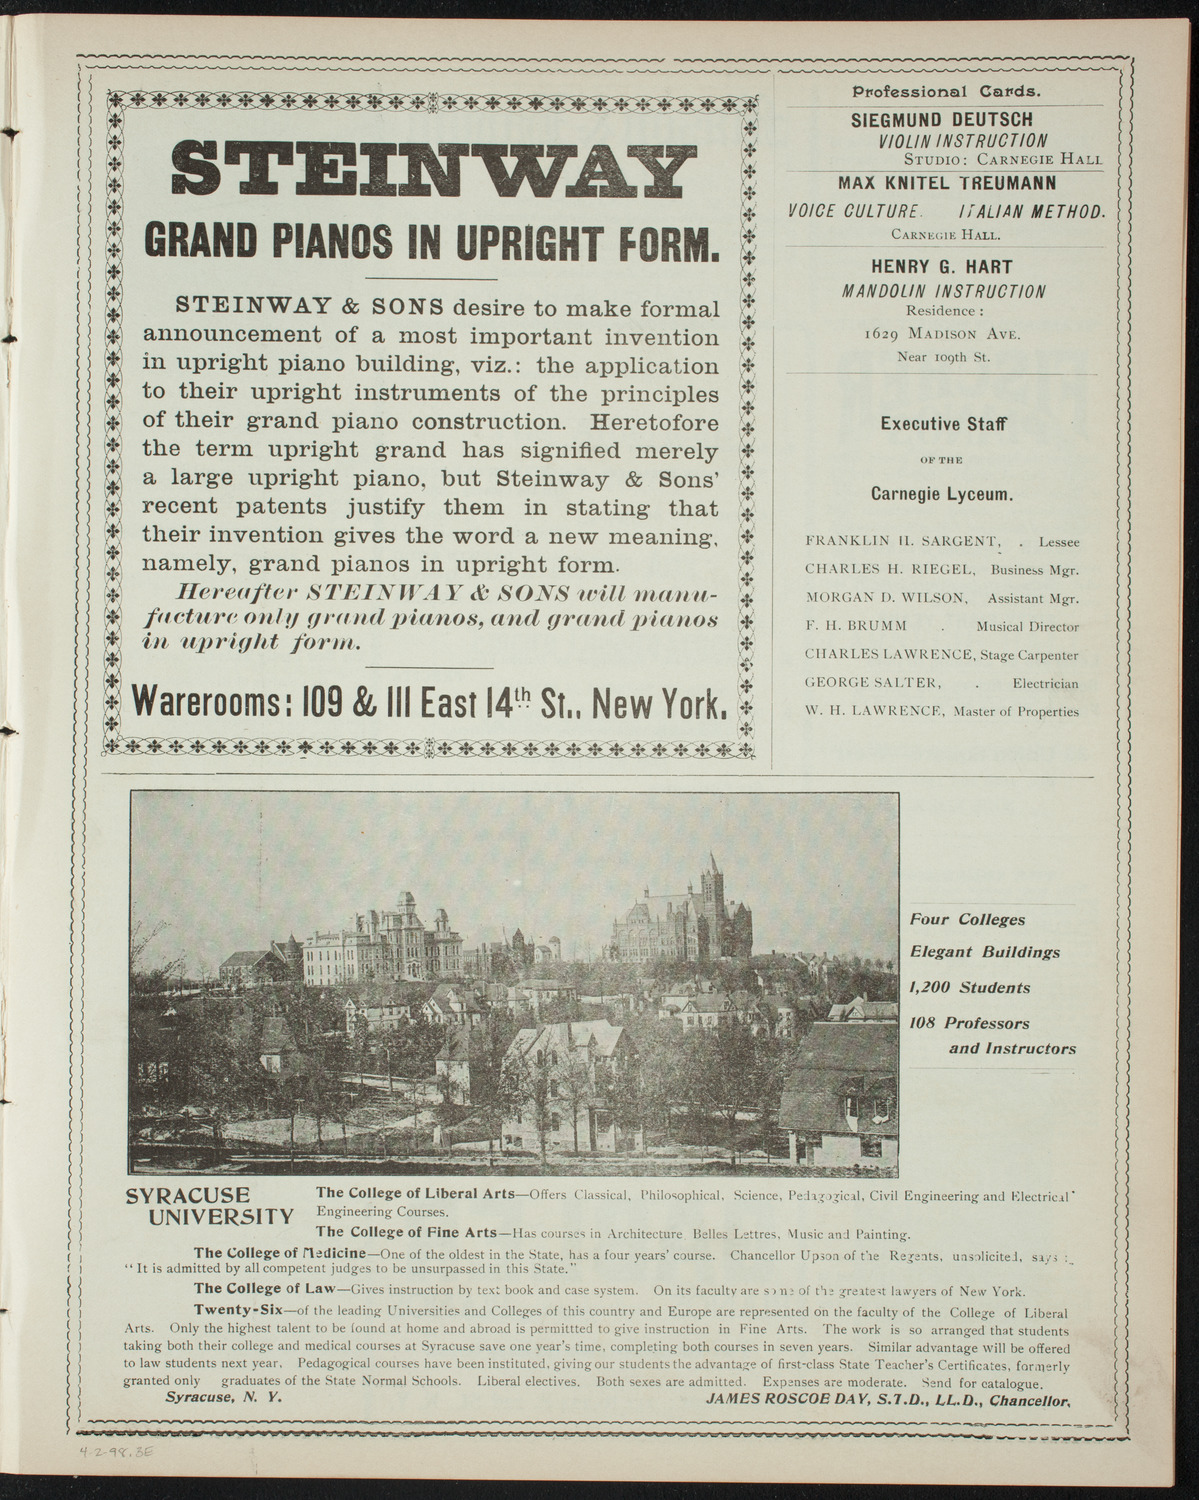 Benefit: Mrs. Percy West and Percita, April 2, 1898, program page 5